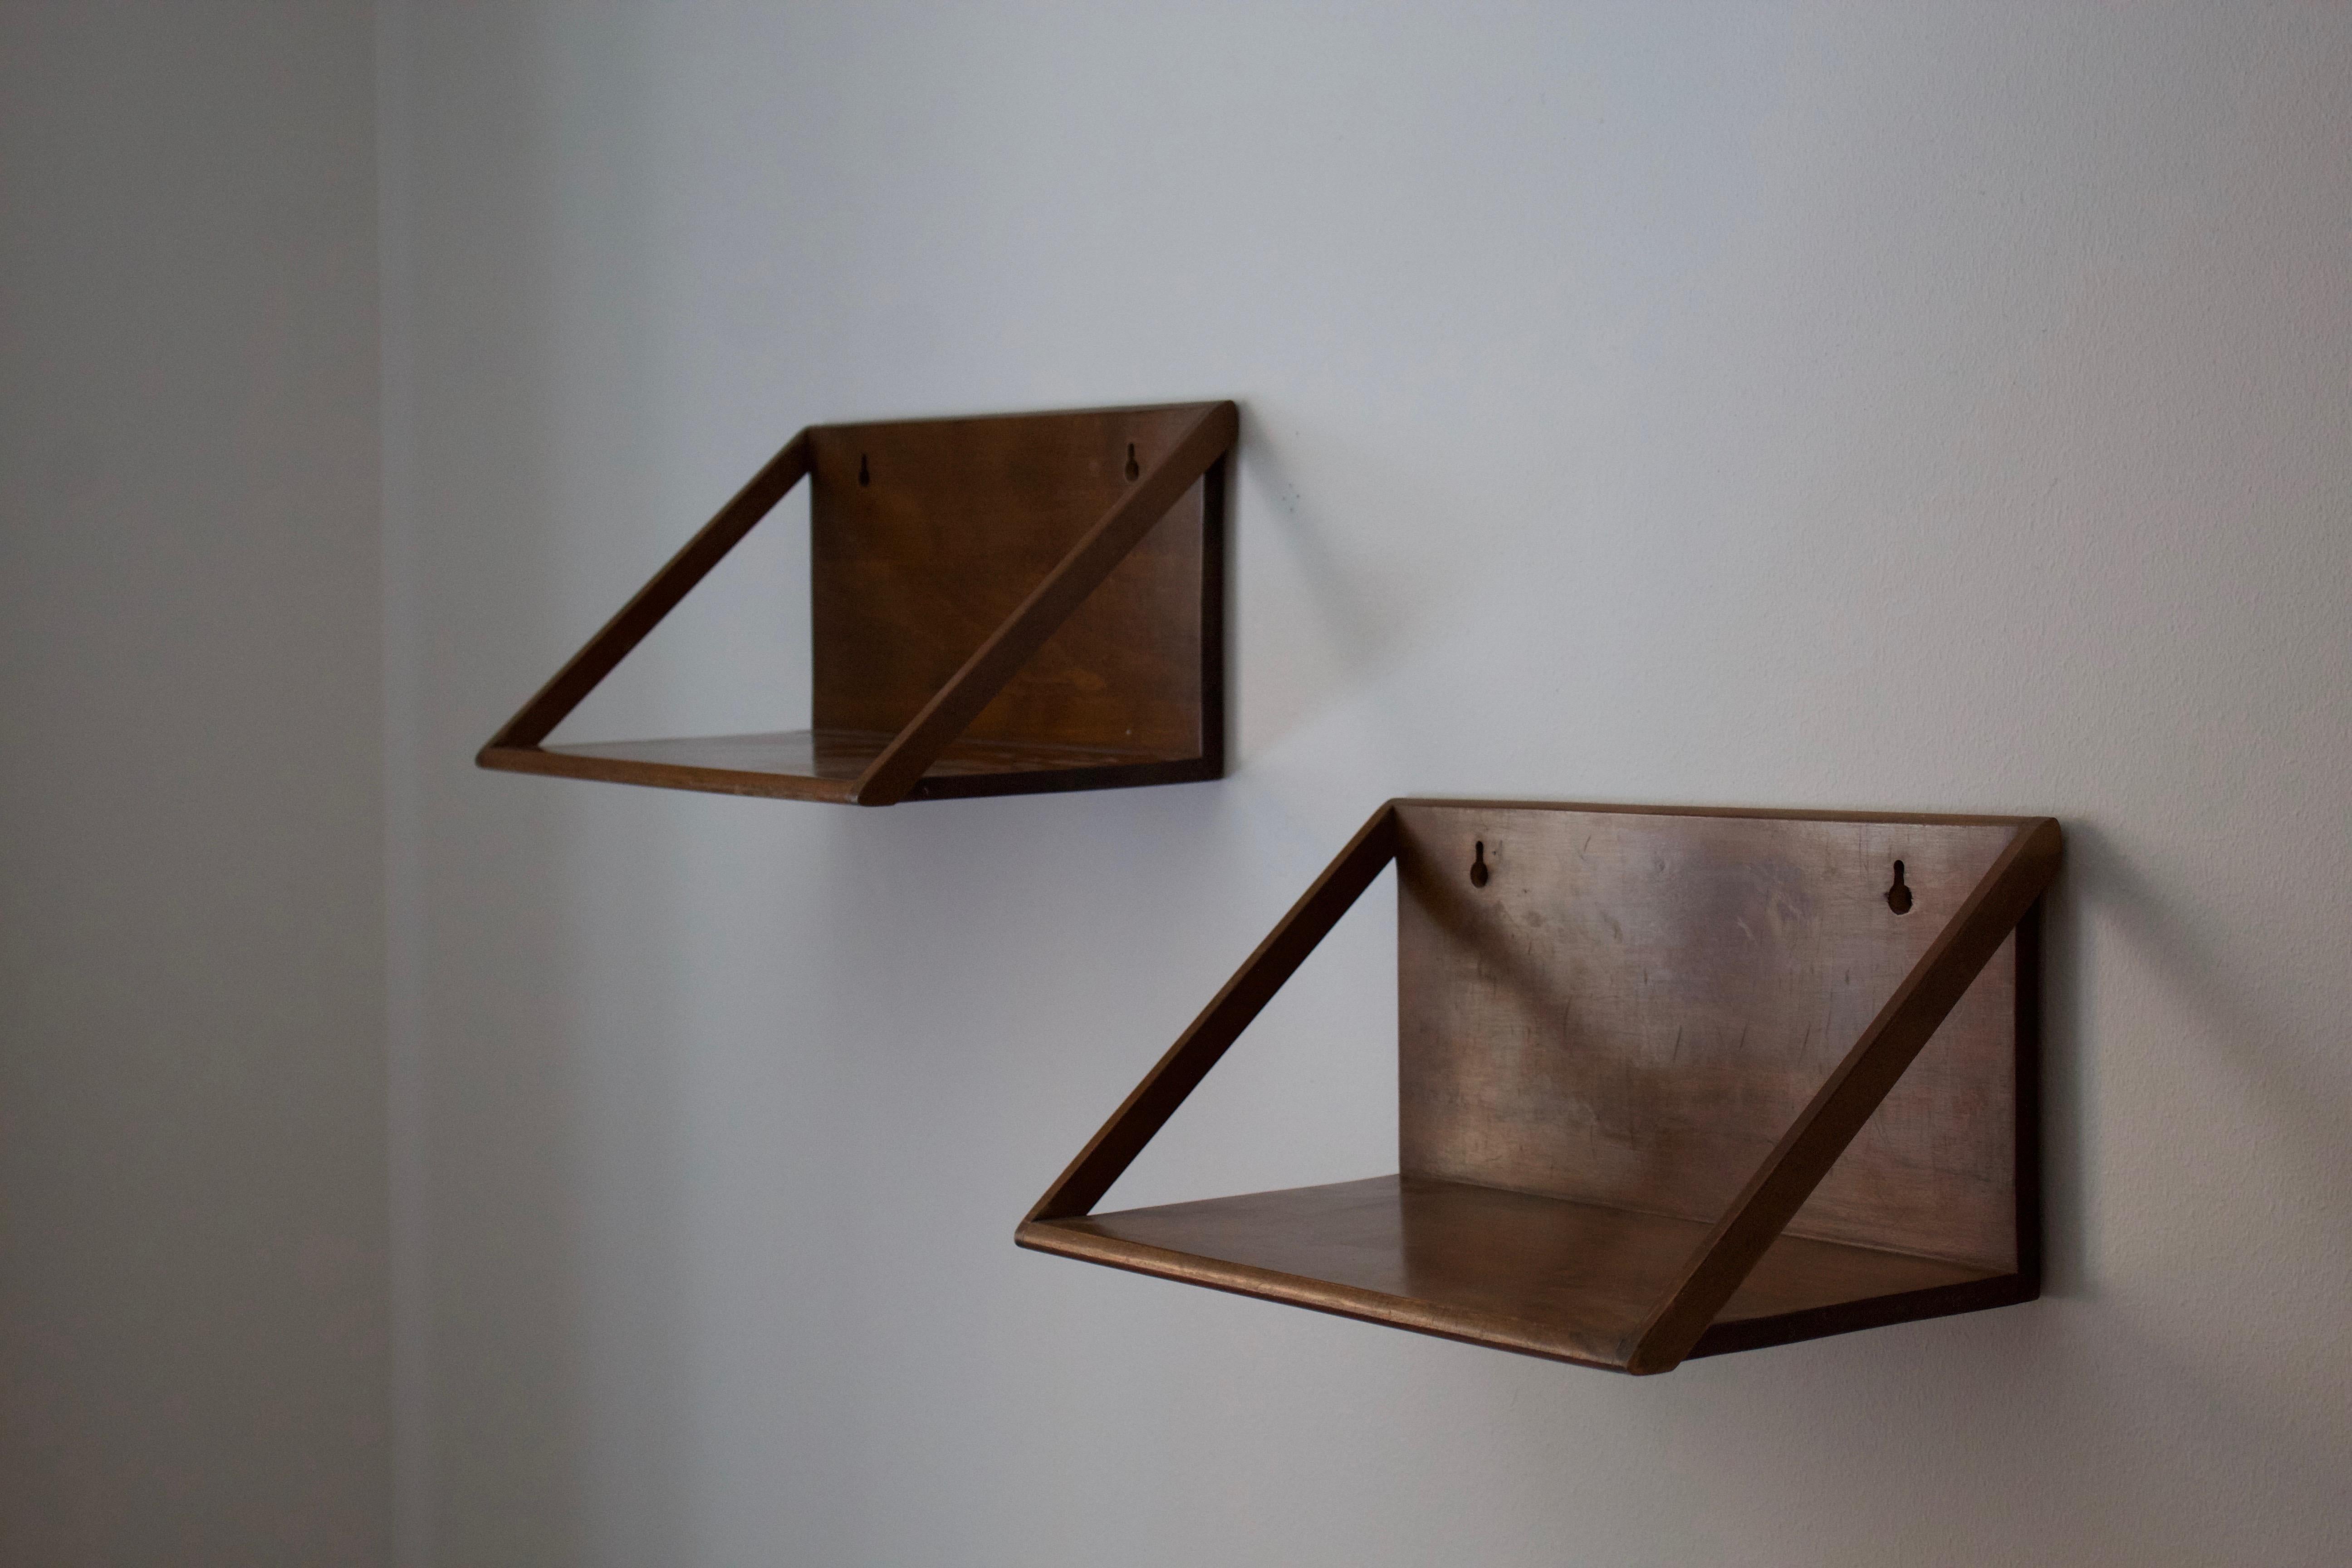 A pair of minimalist wall shelves / nightstands. Designed and produced in Denmark, 1950s.

Other designers of period include Axel Einar Hjorth, Pierre Jeanneret, Franco Albini, Alvar Aalto, and Kaare Klint.